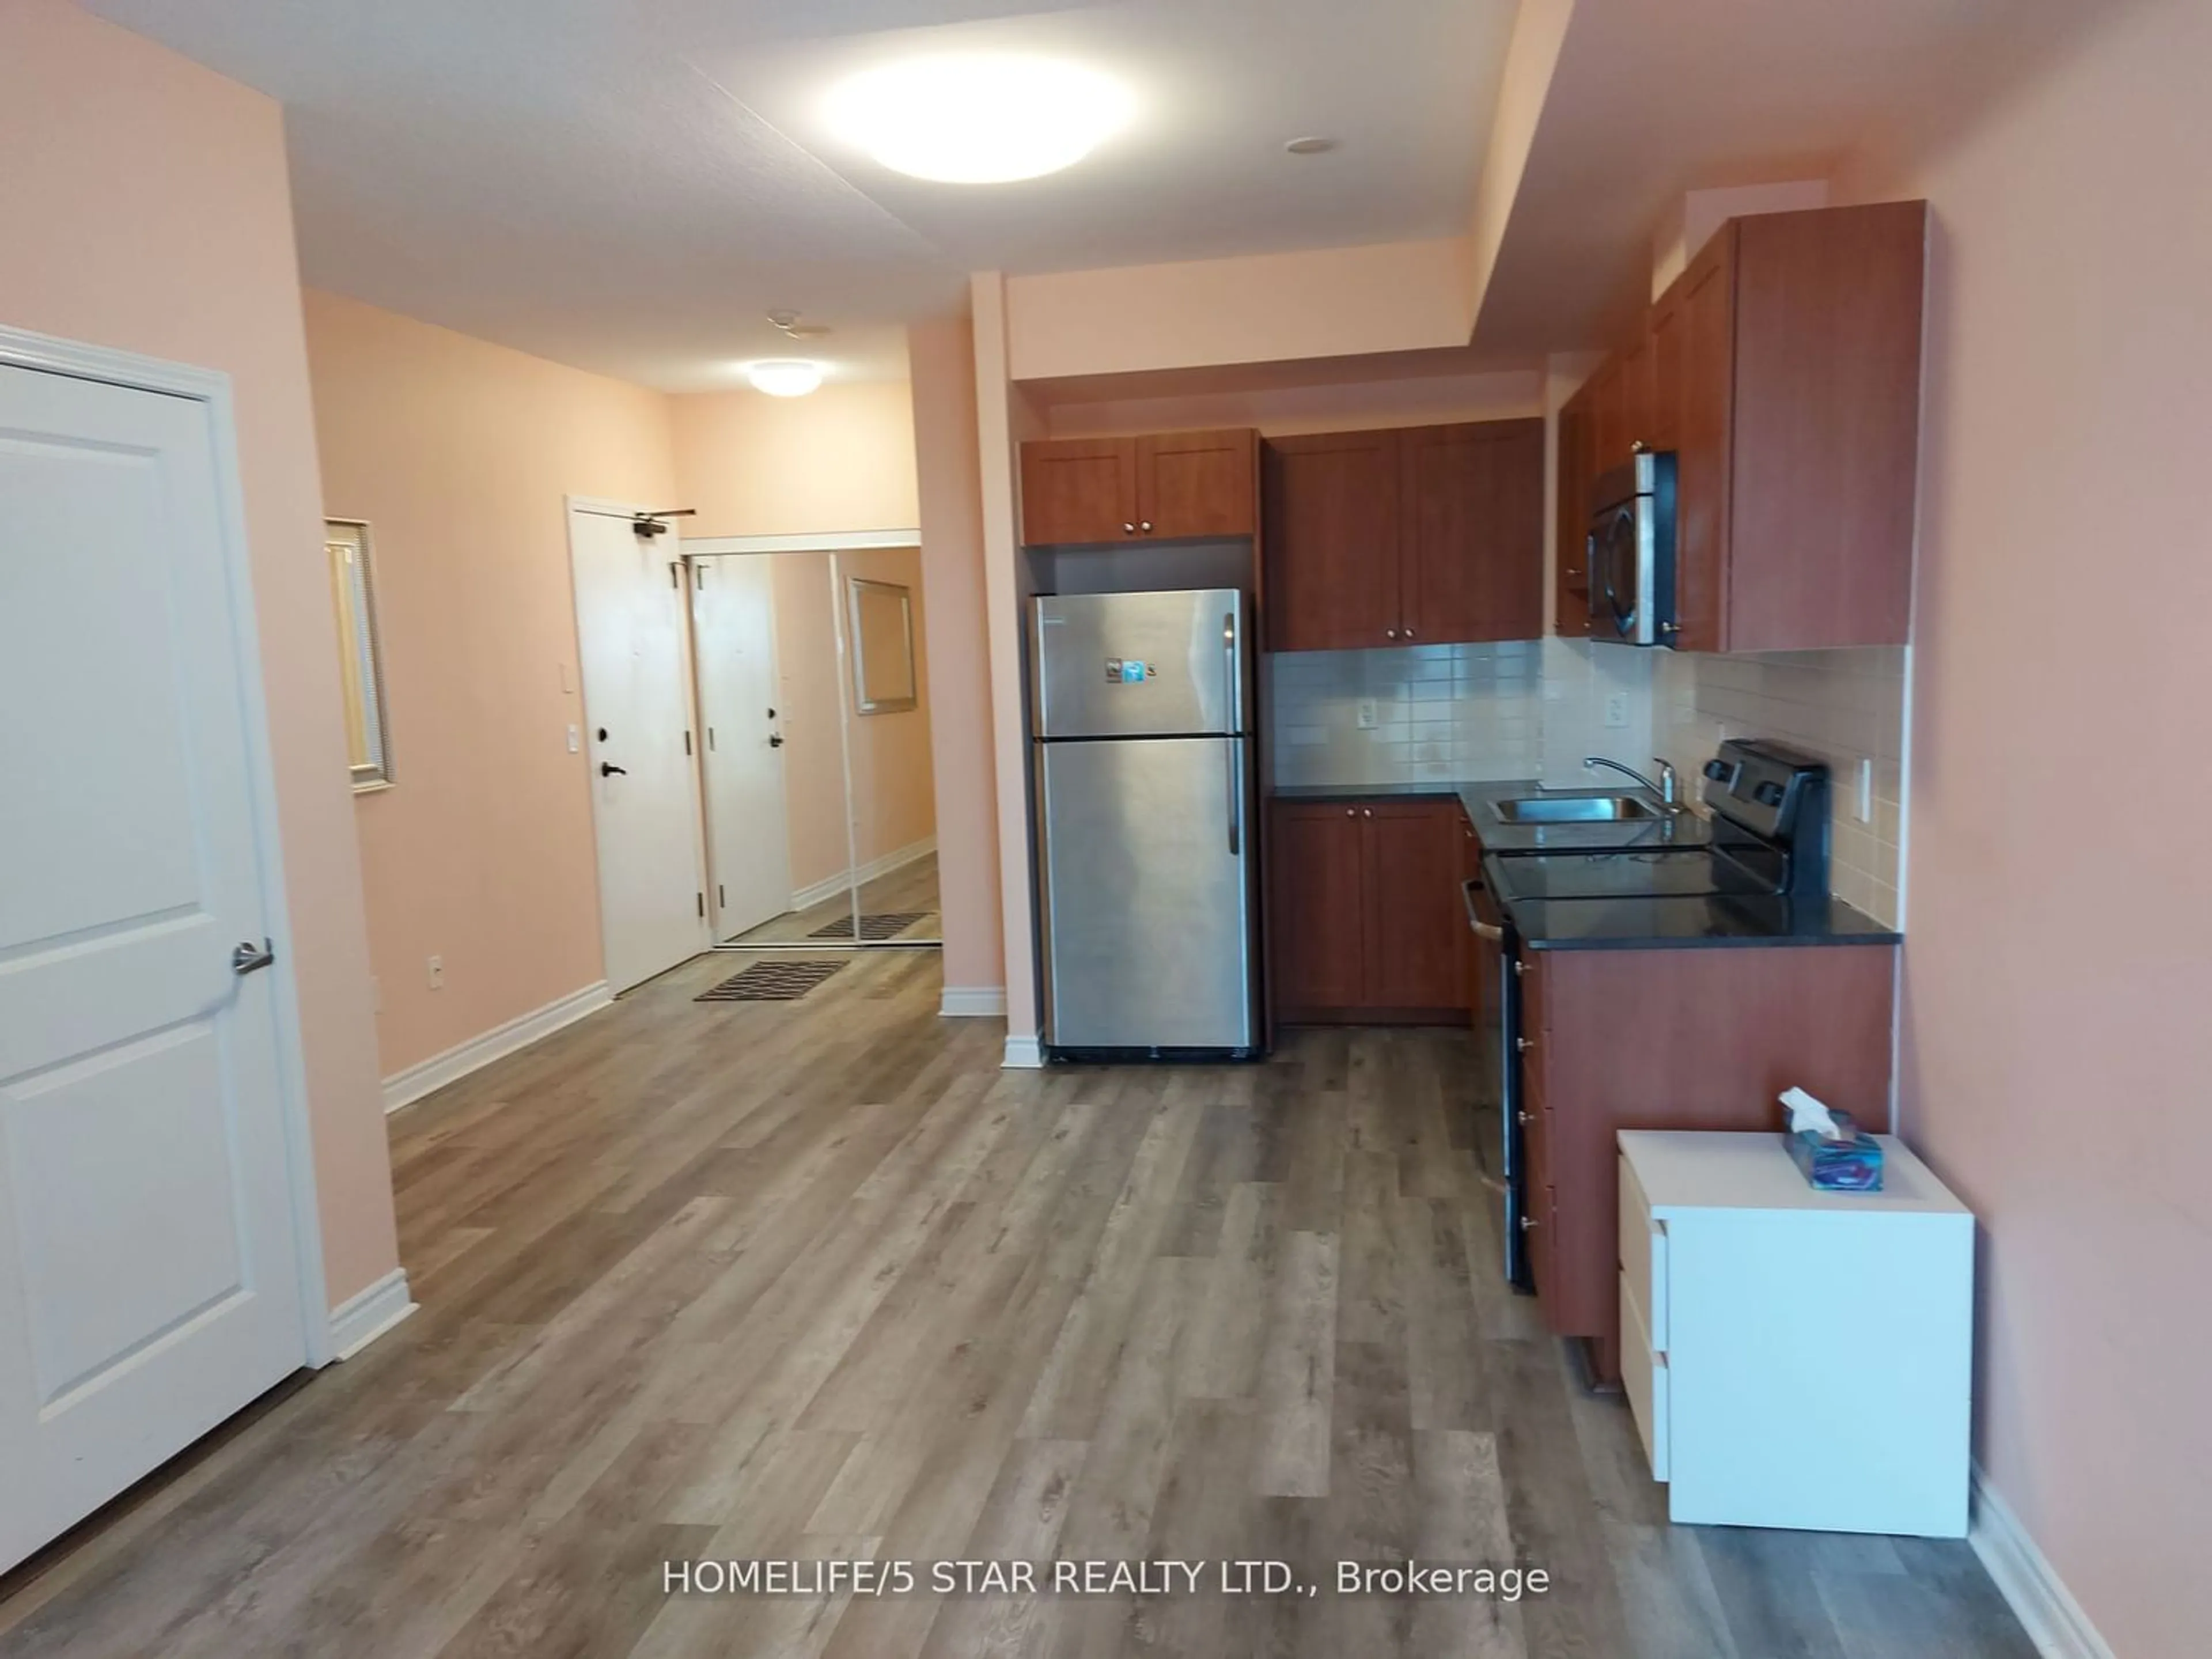 Standard kitchen for 385 Prince Of Wales Dr #3307, Mississauga Ontario L5B 0C6